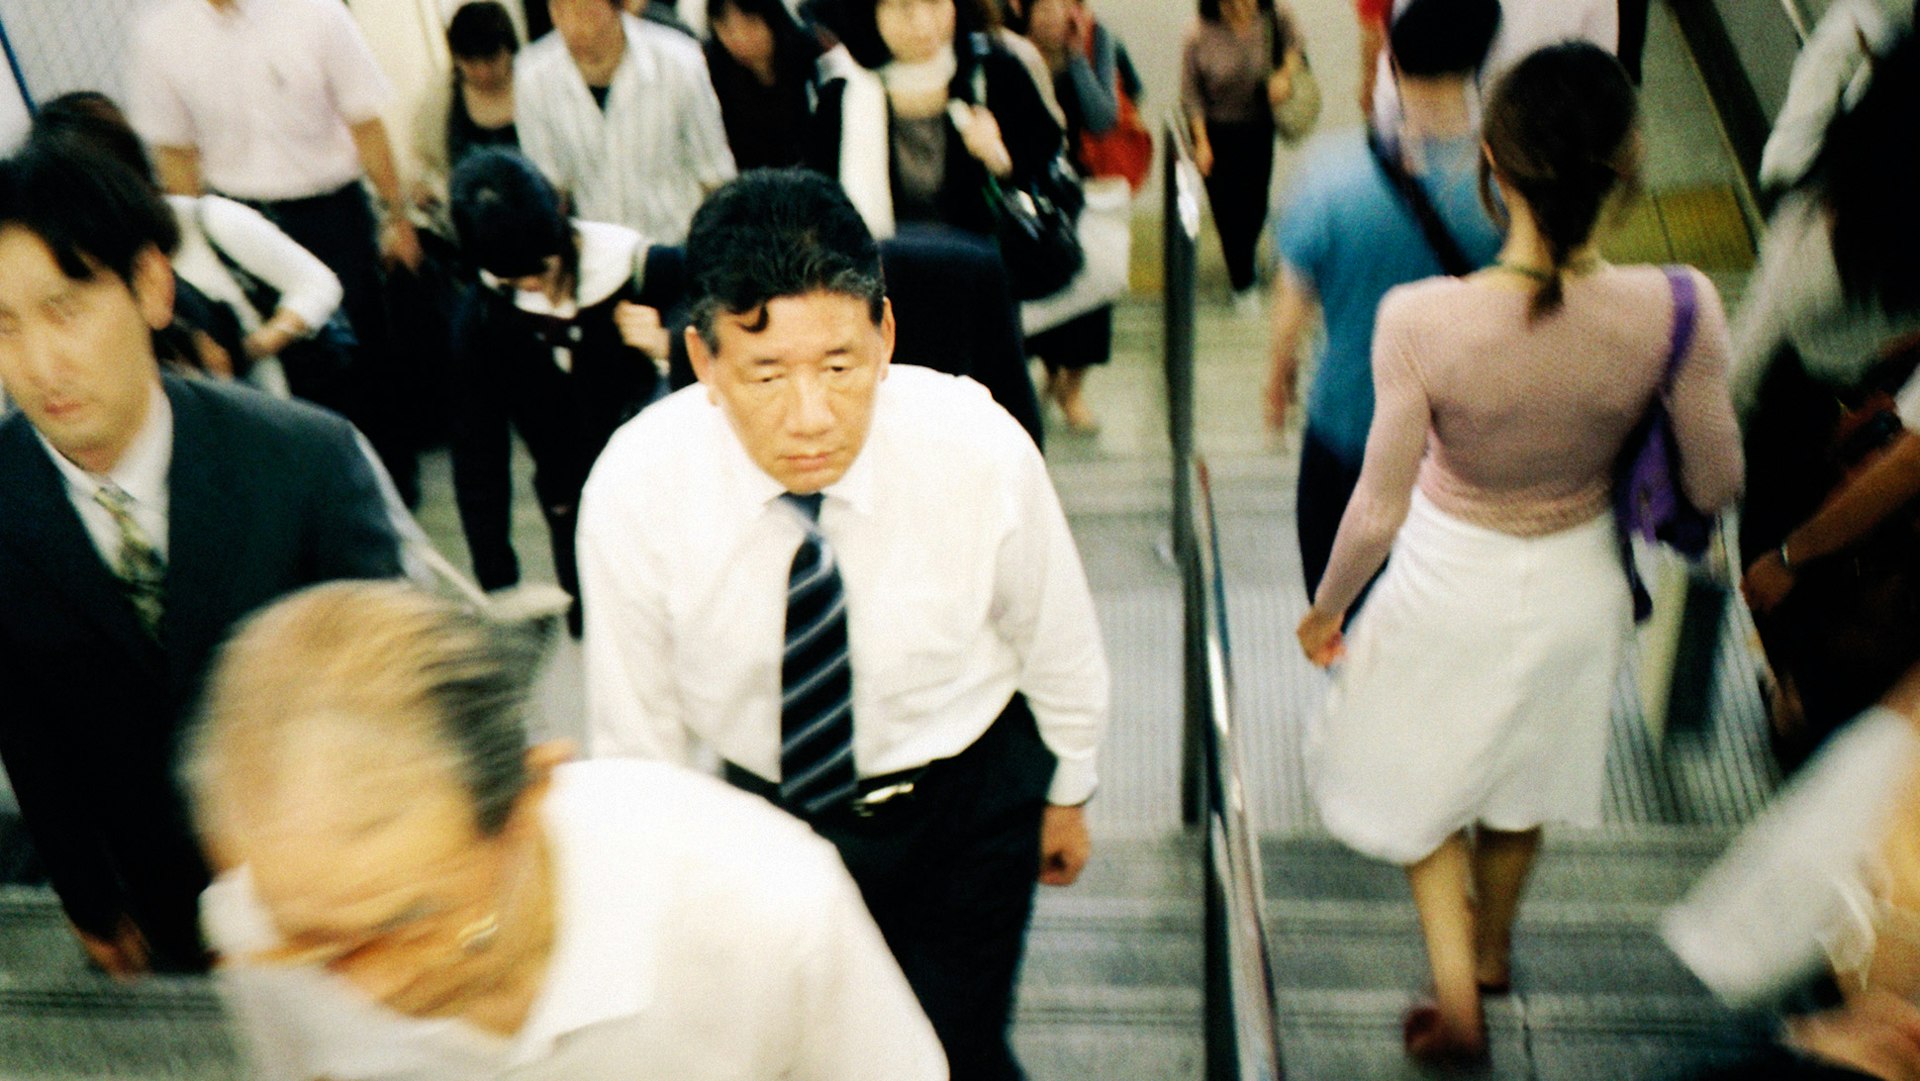 While the plight of the salaryman  may seem unattractive by Western  standards, it’s an esteemed, honorable, often lifelong commitment in Japan.